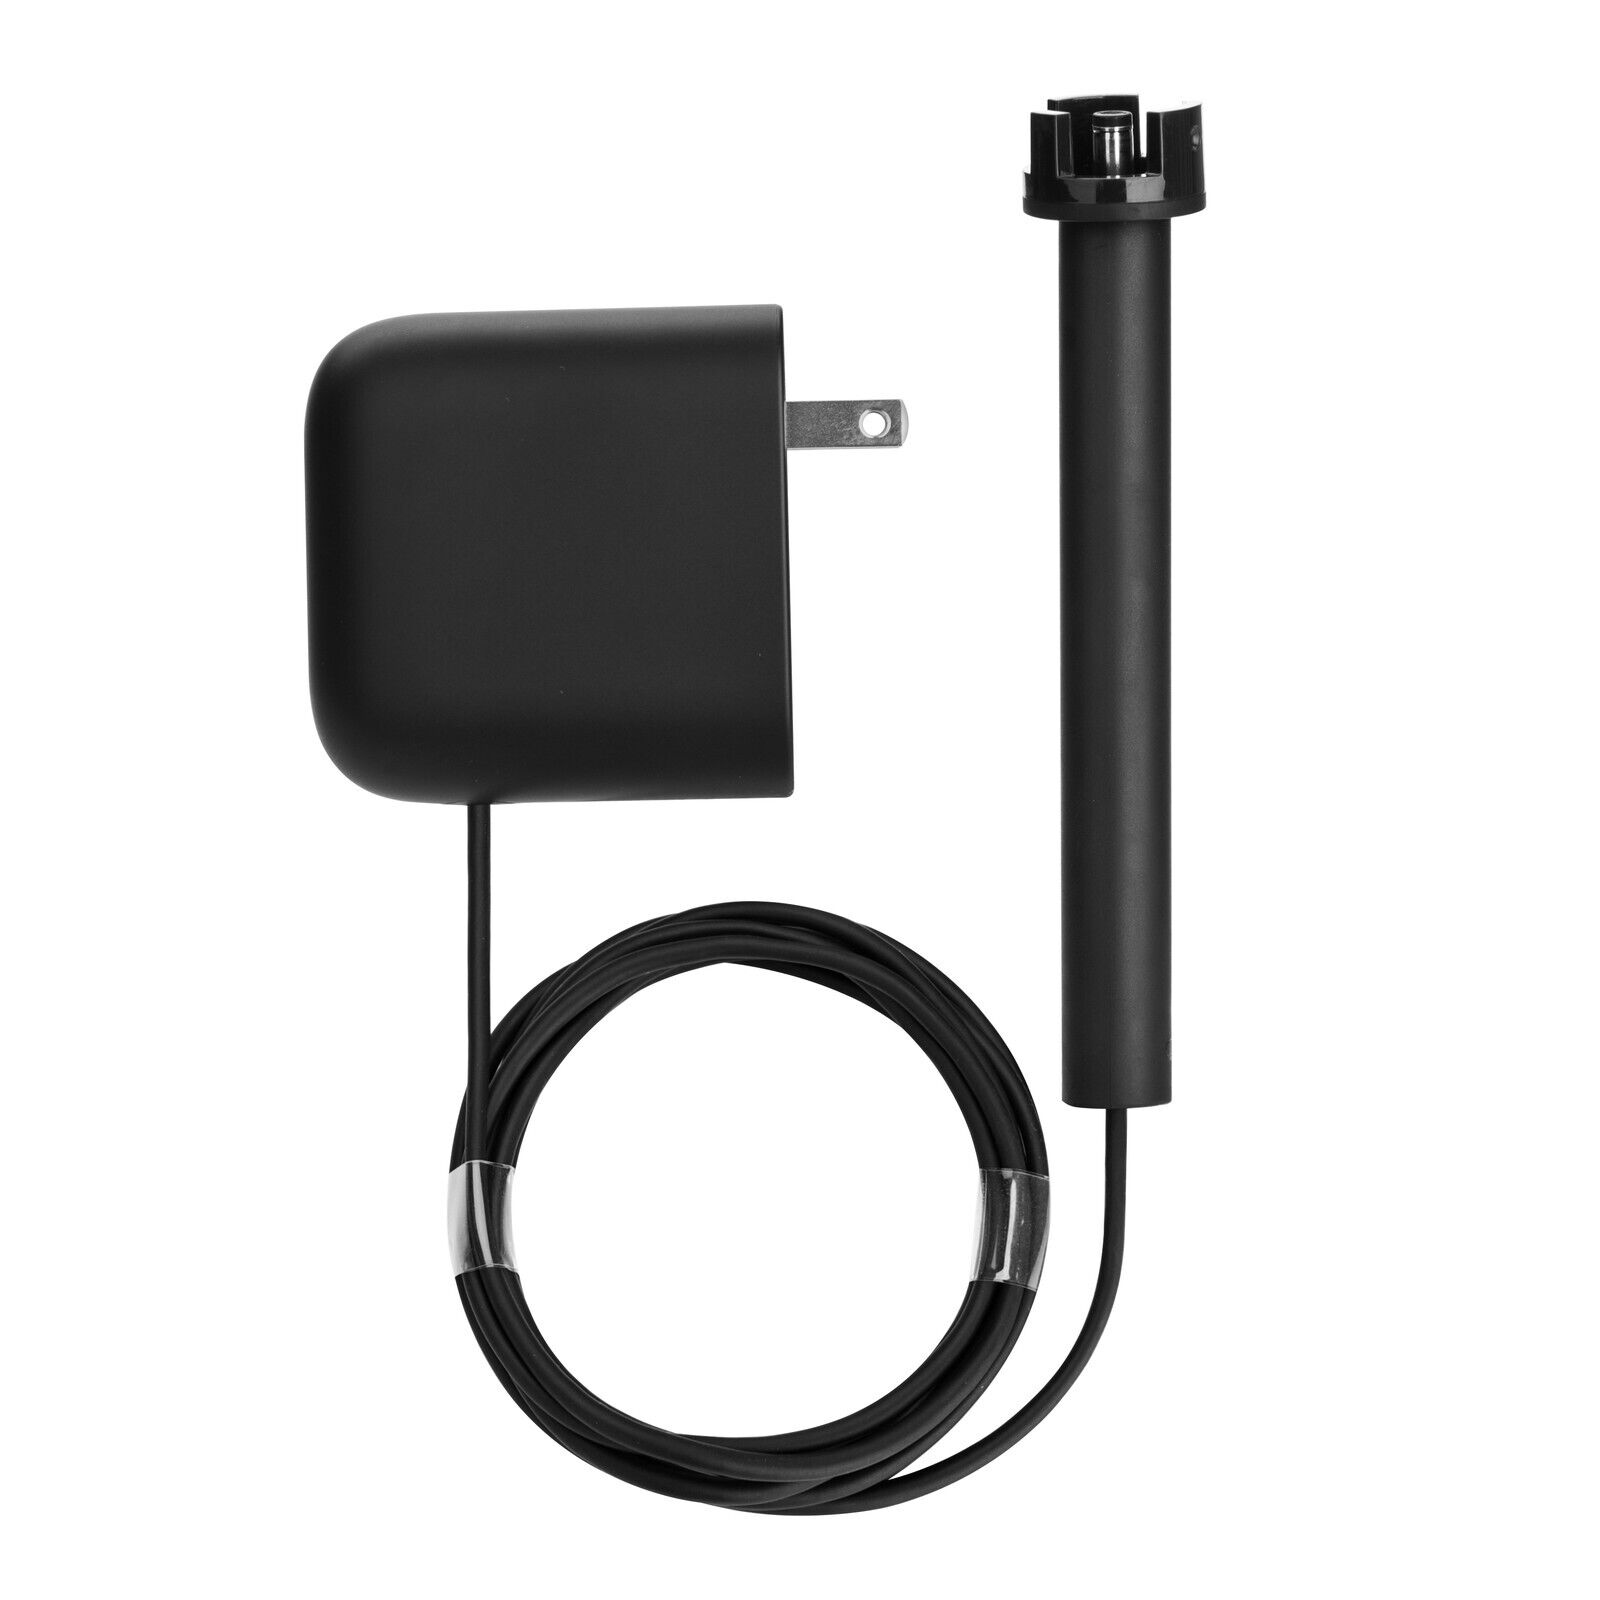 Facebook Power Adapter 19V 2.37A W18-045N1A for Facebook Portal 10" Display 2nd Brand: Facebook Compatible Brand: For - Click Image to Close